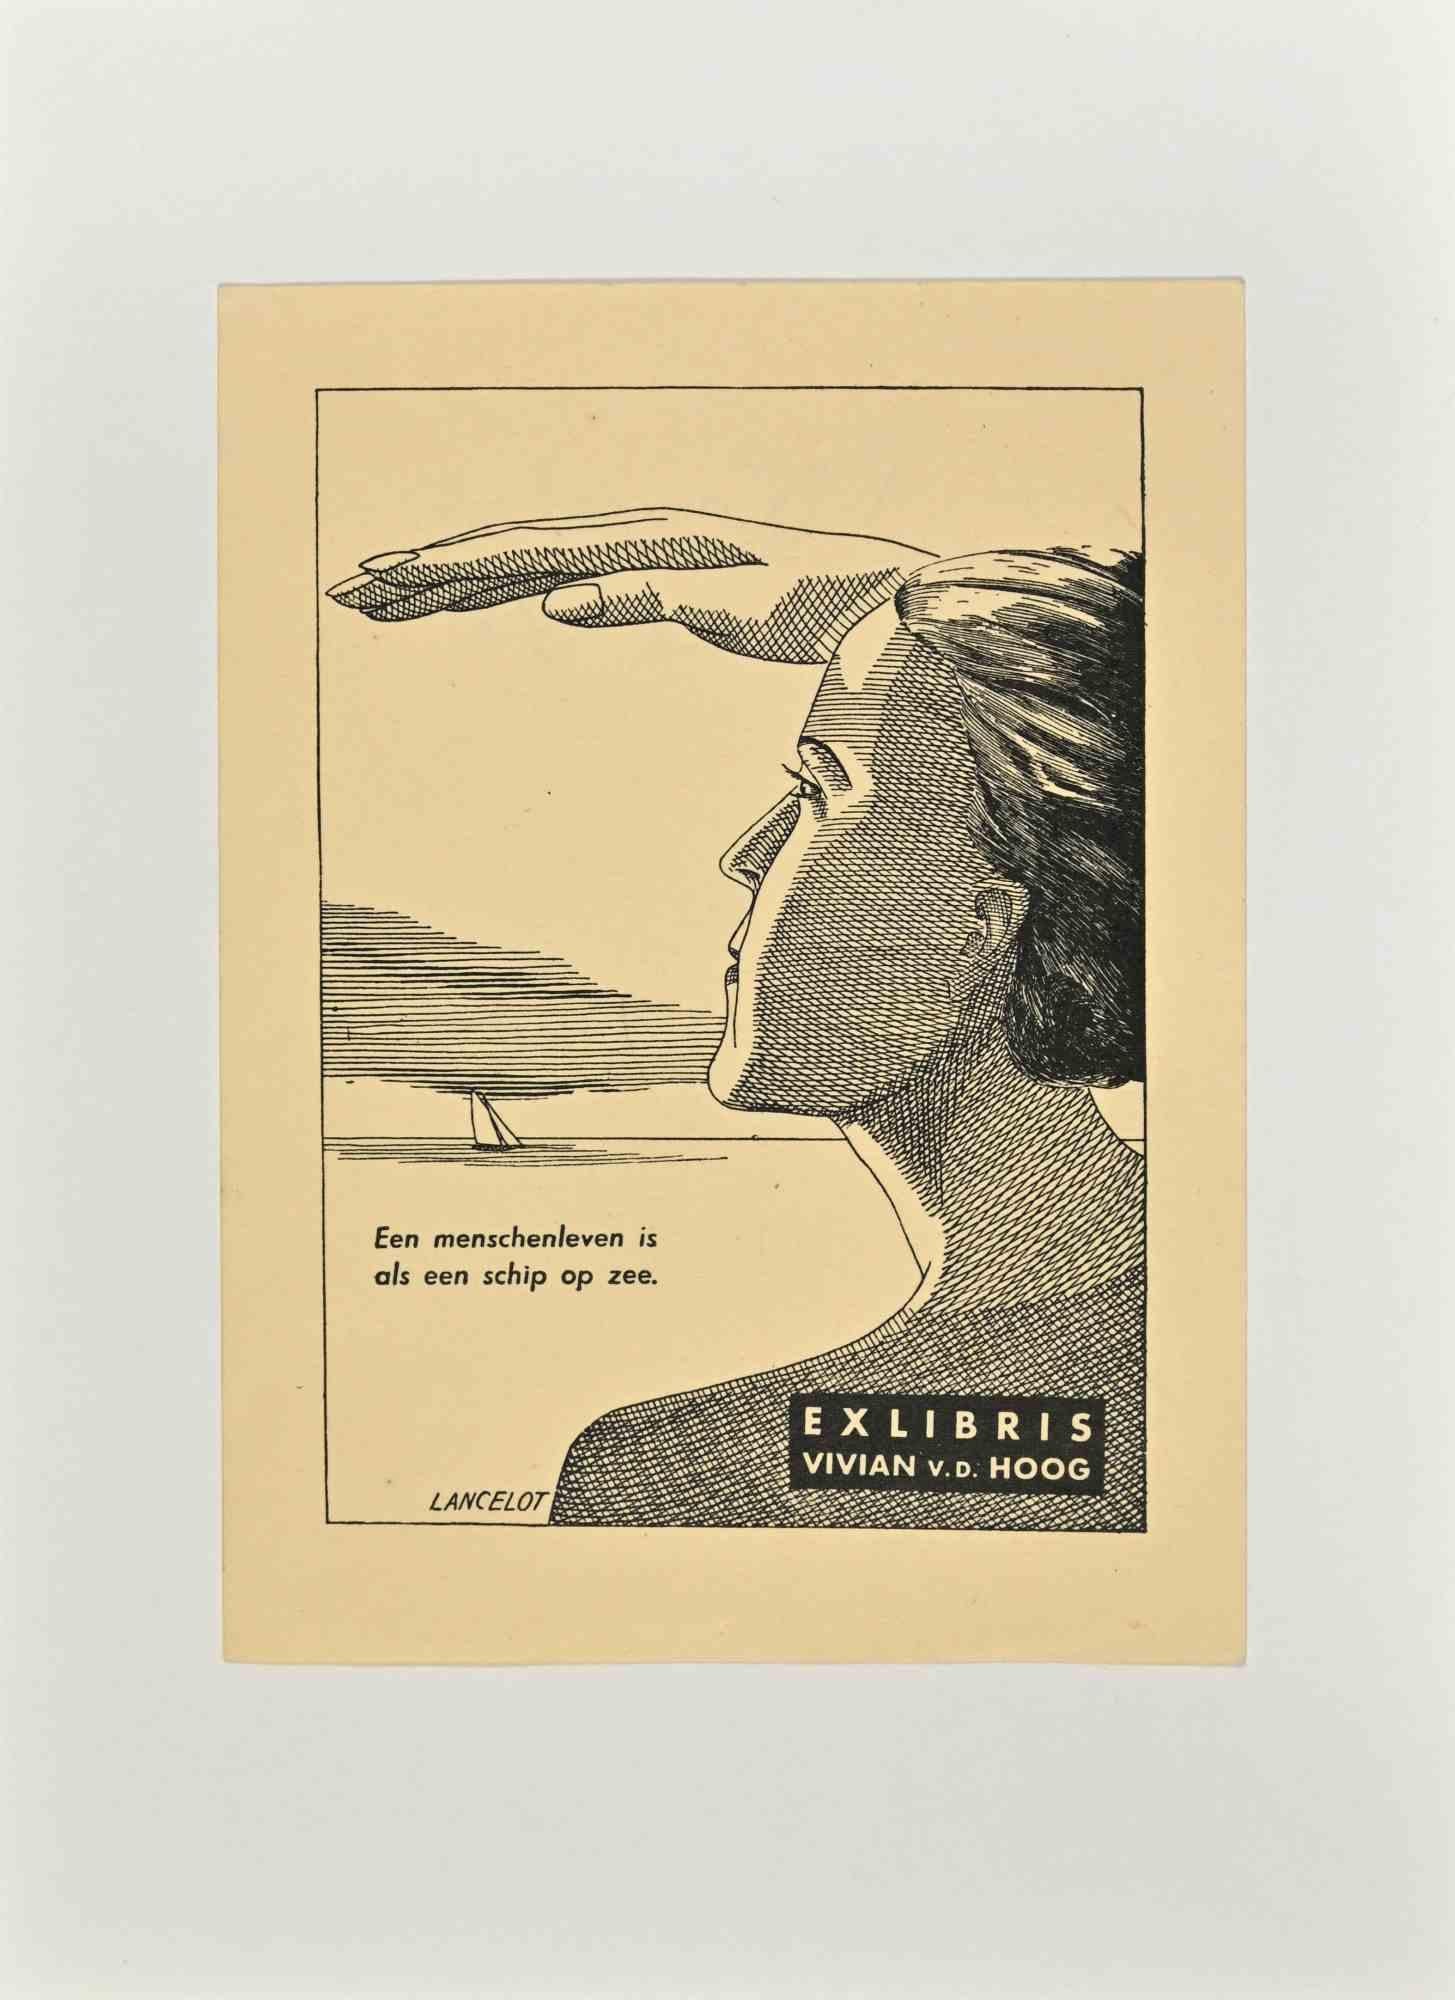  Ex Libris   - Vivian V.D. Hoog is a Modern Artwork realized in Mid 20th Century, by Richard Lancelot, from Nederland.

Ex Libris. B/W woodcut on ivory paper.  Hand signed on the back. 

The work is glued on cardboard.

Total dimensions: 20x 15